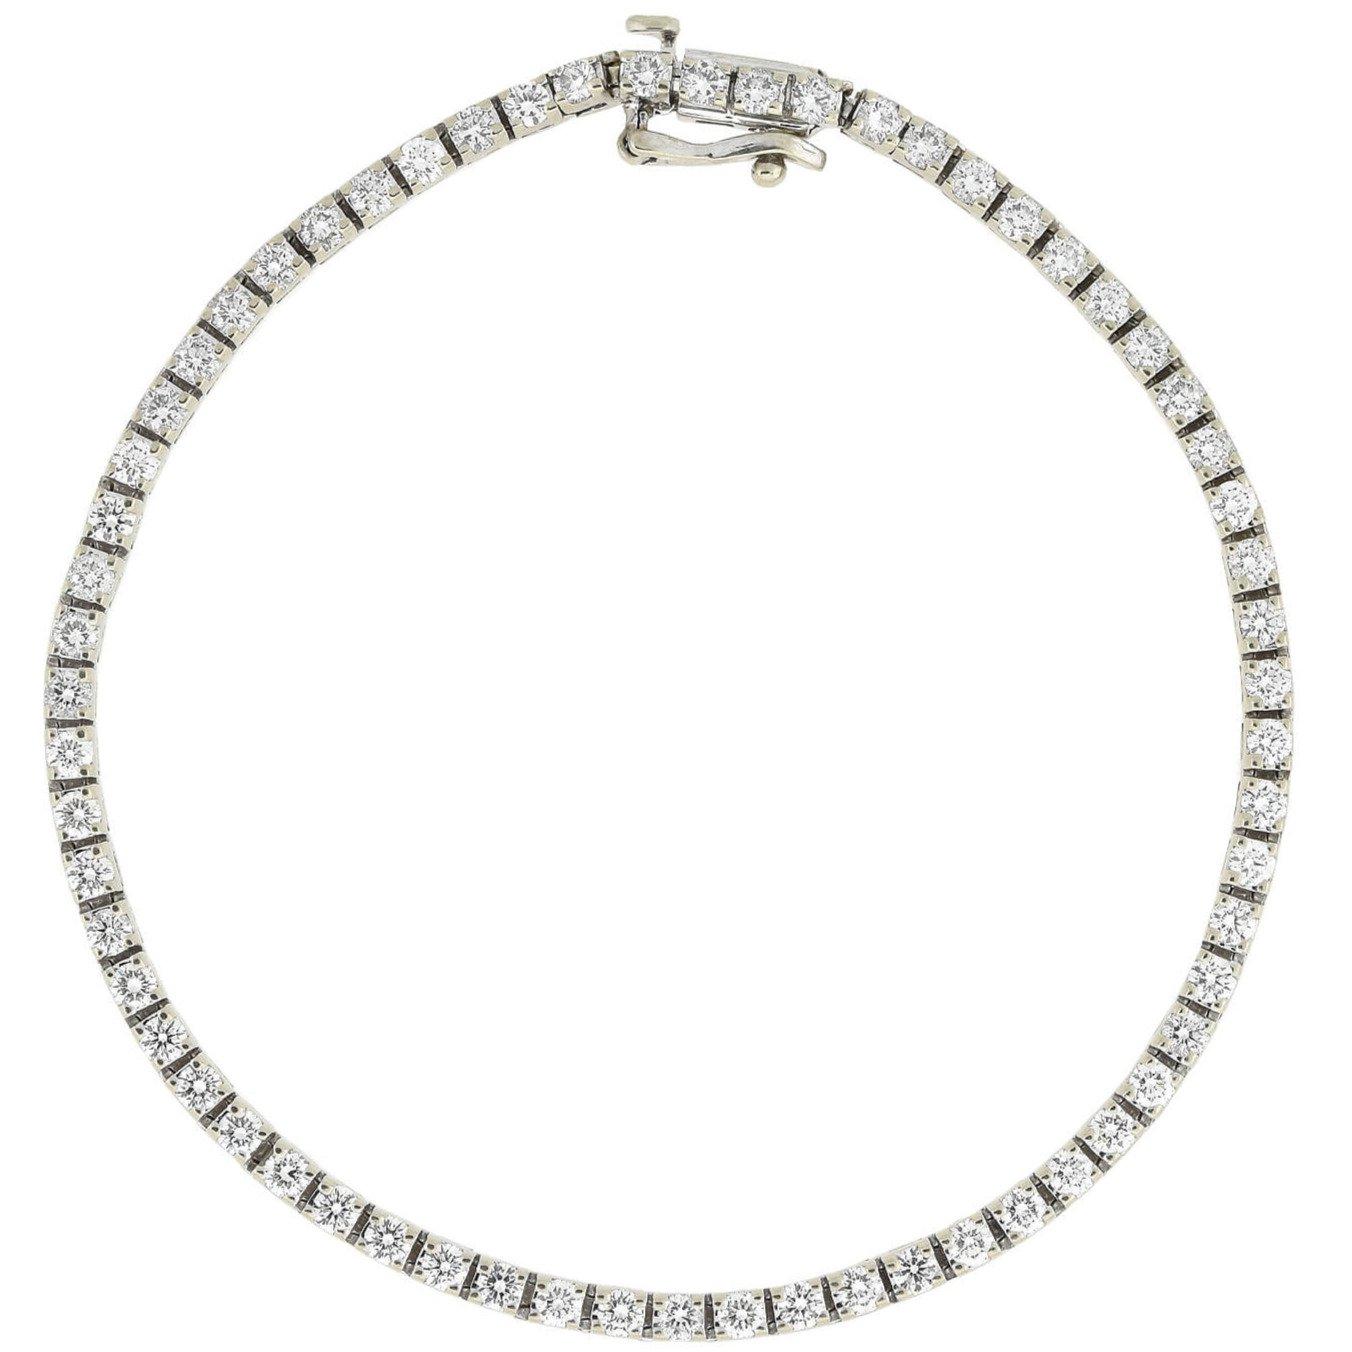 A gorgeous Vintage diamond line bracelet from the 1950s era! Crafted in 14kt white gold, this fabulous piece features a uniform line of sparkling diamonds which are each prong set in an individual hinged box setting. With approximately 2.50ctw of